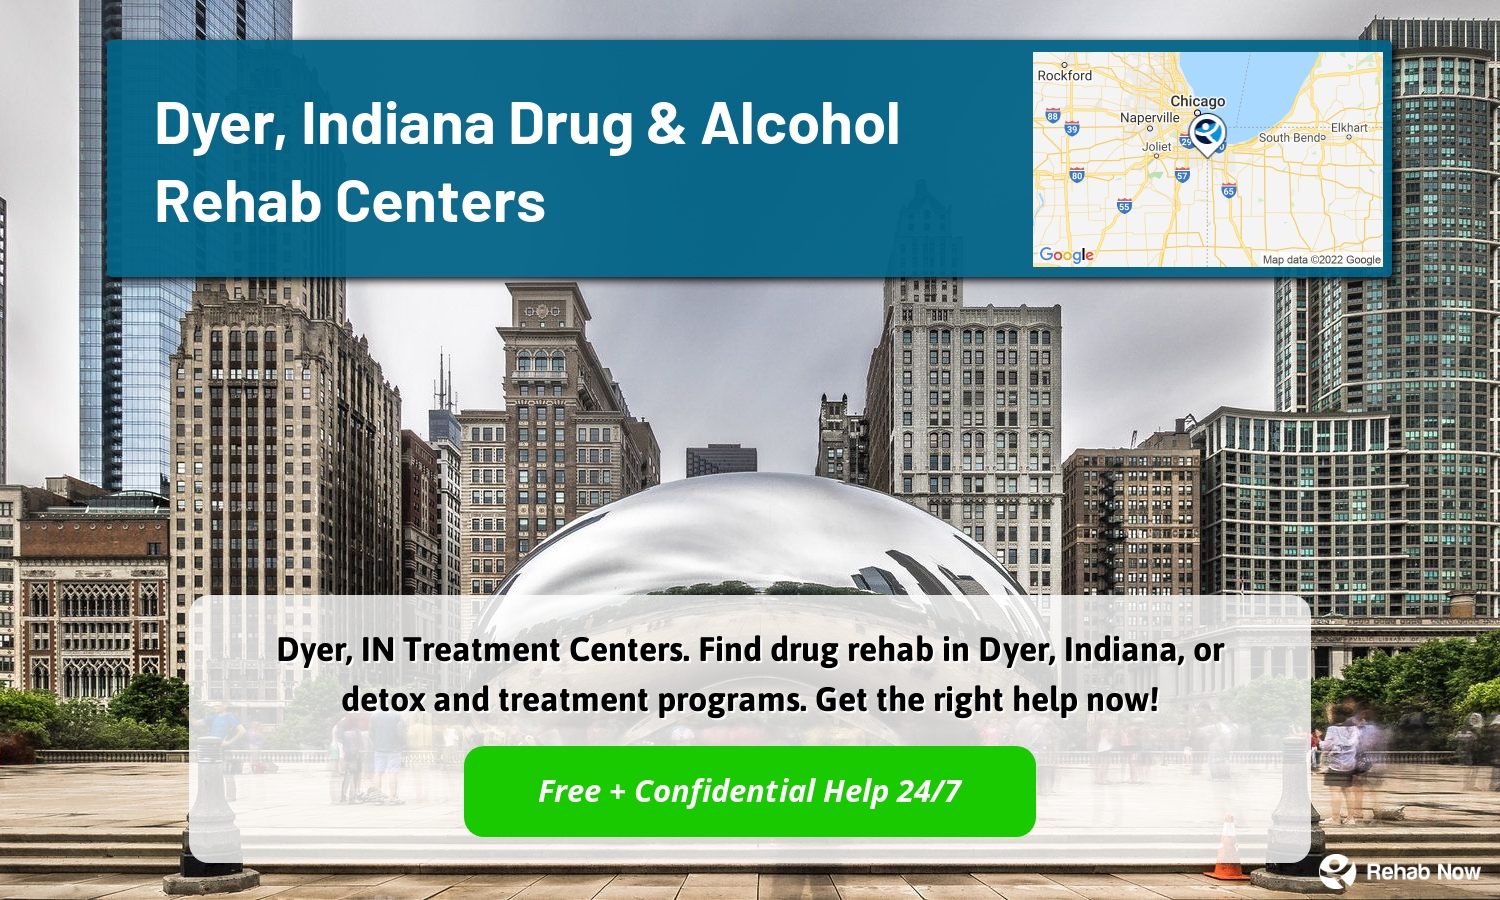 Dyer, IN Treatment Centers. Find drug rehab in Dyer, Indiana, or detox and treatment programs. Get the right help now!